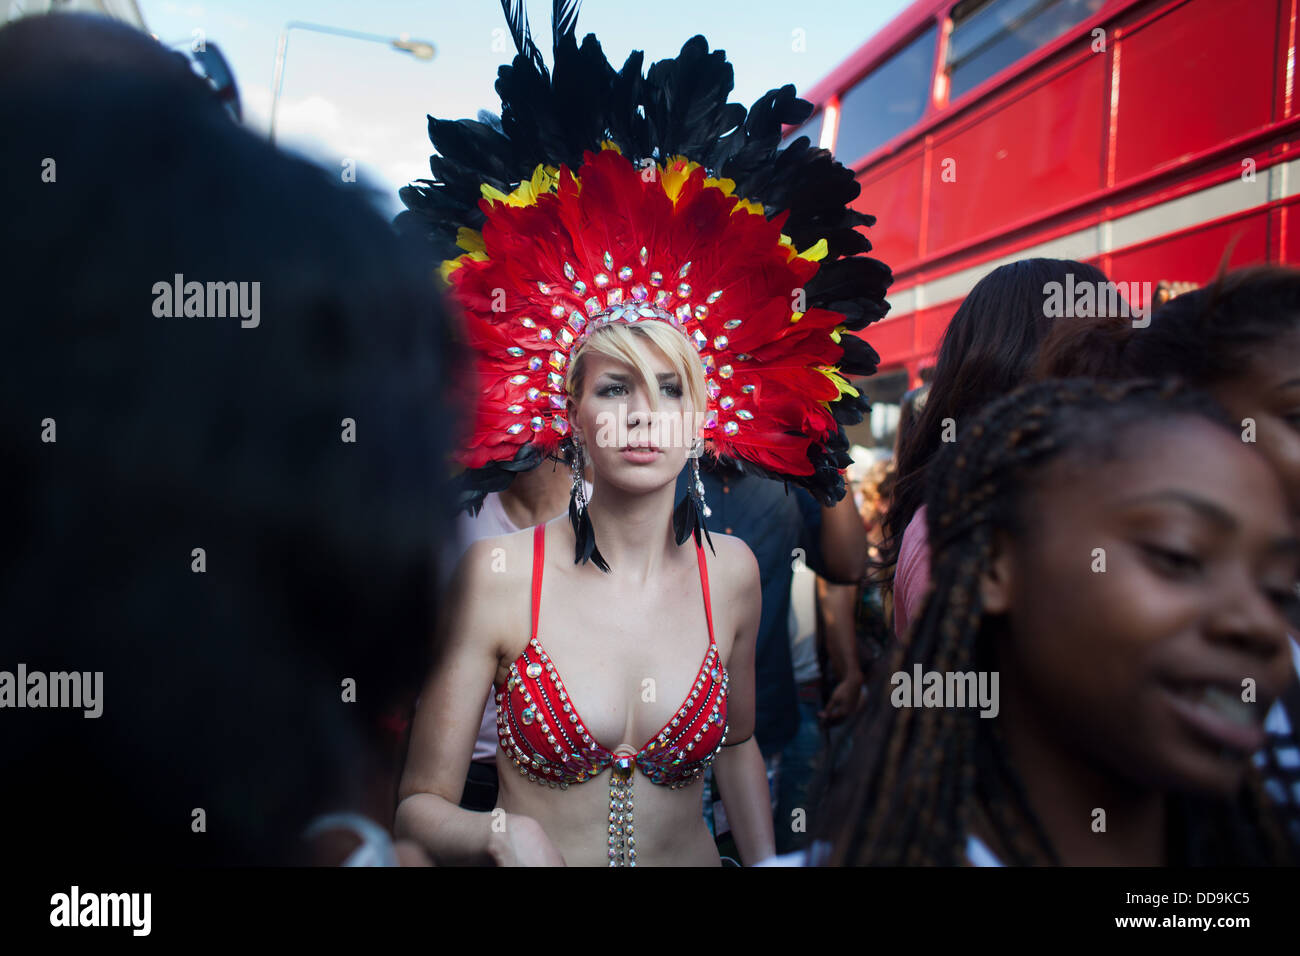 A young white skimpy clad woman makes her way through a crowd of black women along a red double decker bus in the parade. Stock Photo